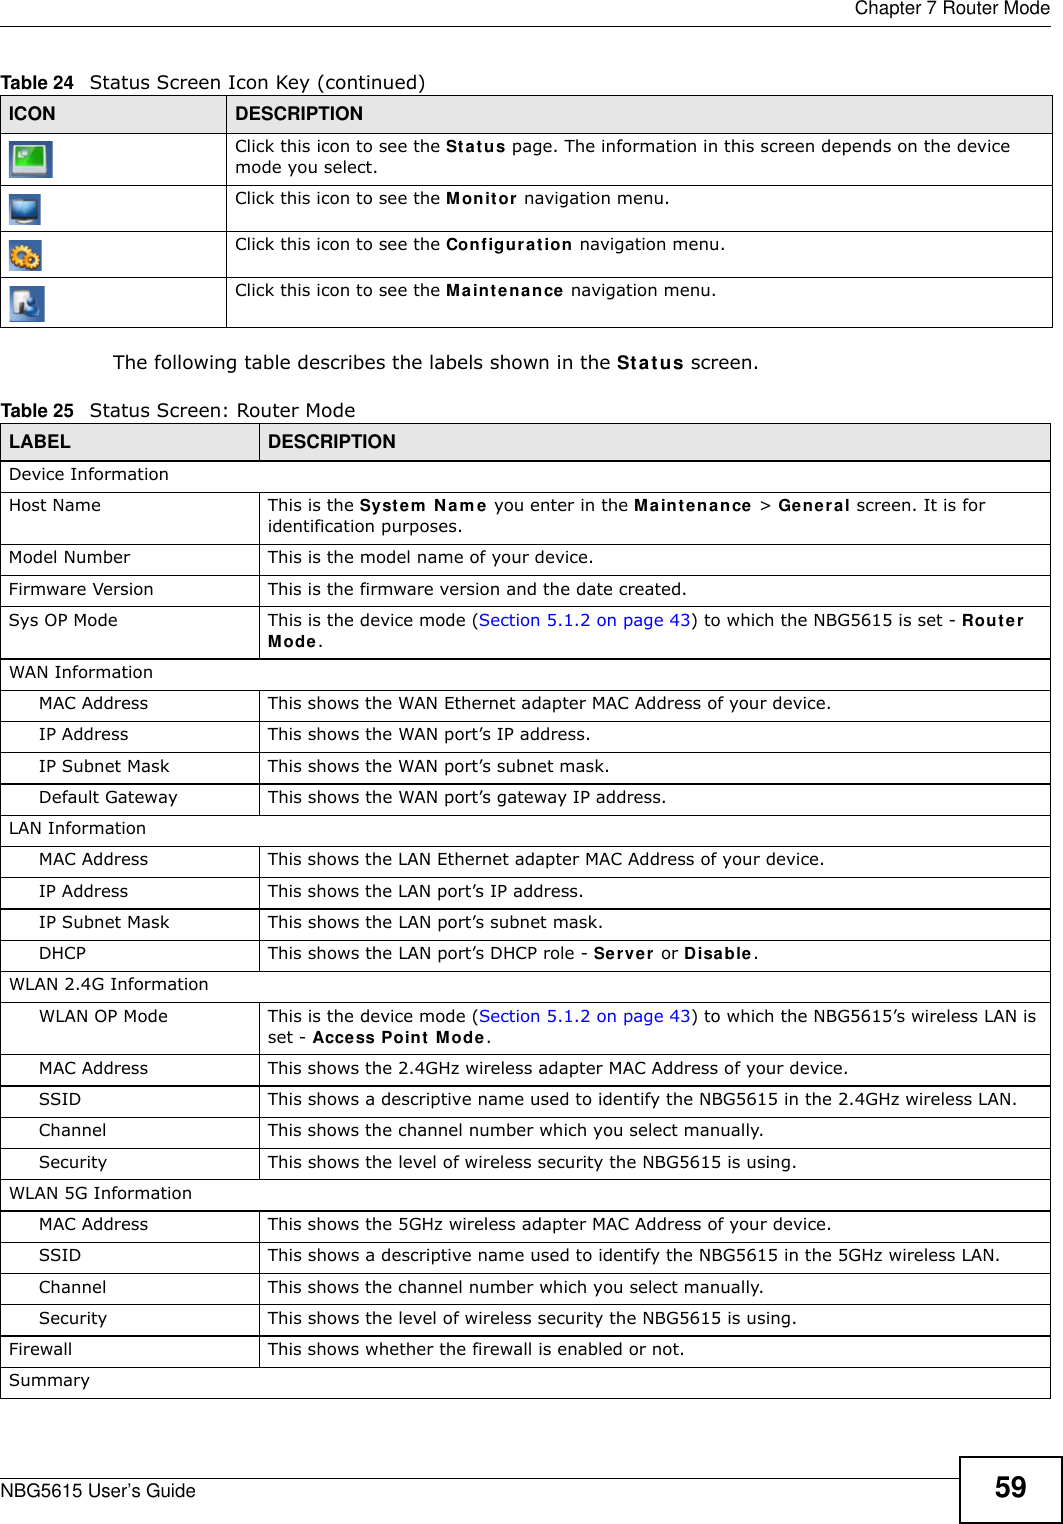  Chapter 7 Router ModeNBG5615 User’s Guide 59The following table describes the labels shown in the Status screen.Click this icon to see the Status page. The information in this screen depends on the device mode you select. Click this icon to see the Monitor navigation menu. Click this icon to see the Configuration navigation menu. Click this icon to see the Maintenance navigation menu. Table 24   Status Screen Icon Key (continued)ICON DESCRIPTIONTable 25   Status Screen: Router Mode  LABEL DESCRIPTIONDevice InformationHost Name This is the System  Nam e you enter in the Maintenance &gt; General screen. It is for identification purposes.Model Number This is the model name of your device.Firmware Version This is the firmware version and the date created. Sys OP Mode This is the device mode (Section 5.1.2 on page 43) to which the NBG5615 is set - Router Mode.WAN InformationMAC Address This shows the WAN Ethernet adapter MAC Address of your device.IP Address This shows the WAN port’s IP address.IP Subnet Mask This shows the WAN port’s subnet mask.Default Gateway This shows the WAN port’s gateway IP address.LAN InformationMAC Address This shows the LAN Ethernet adapter MAC Address of your device.IP Address This shows the LAN port’s IP address.IP Subnet Mask This shows the LAN port’s subnet mask.DHCP This shows the LAN port’s DHCP role - Server or Disable.WLAN 2.4G InformationWLAN OP Mode This is the device mode (Section 5.1.2 on page 43) to which the NBG5615’s wireless LAN is set - Access Point Mode.MAC Address This shows the 2.4GHz wireless adapter MAC Address of your device.SSID This shows a descriptive name used to identify the NBG5615 in the 2.4GHz wireless LAN. Channel This shows the channel number which you select manually.Security This shows the level of wireless security the NBG5615 is using.WLAN 5G InformationMAC Address This shows the 5GHz wireless adapter MAC Address of your device.SSID This shows a descriptive name used to identify the NBG5615 in the 5GHz wireless LAN. Channel This shows the channel number which you select manually.Security This shows the level of wireless security the NBG5615 is using.Firewall This shows whether the firewall is enabled or not.Summary